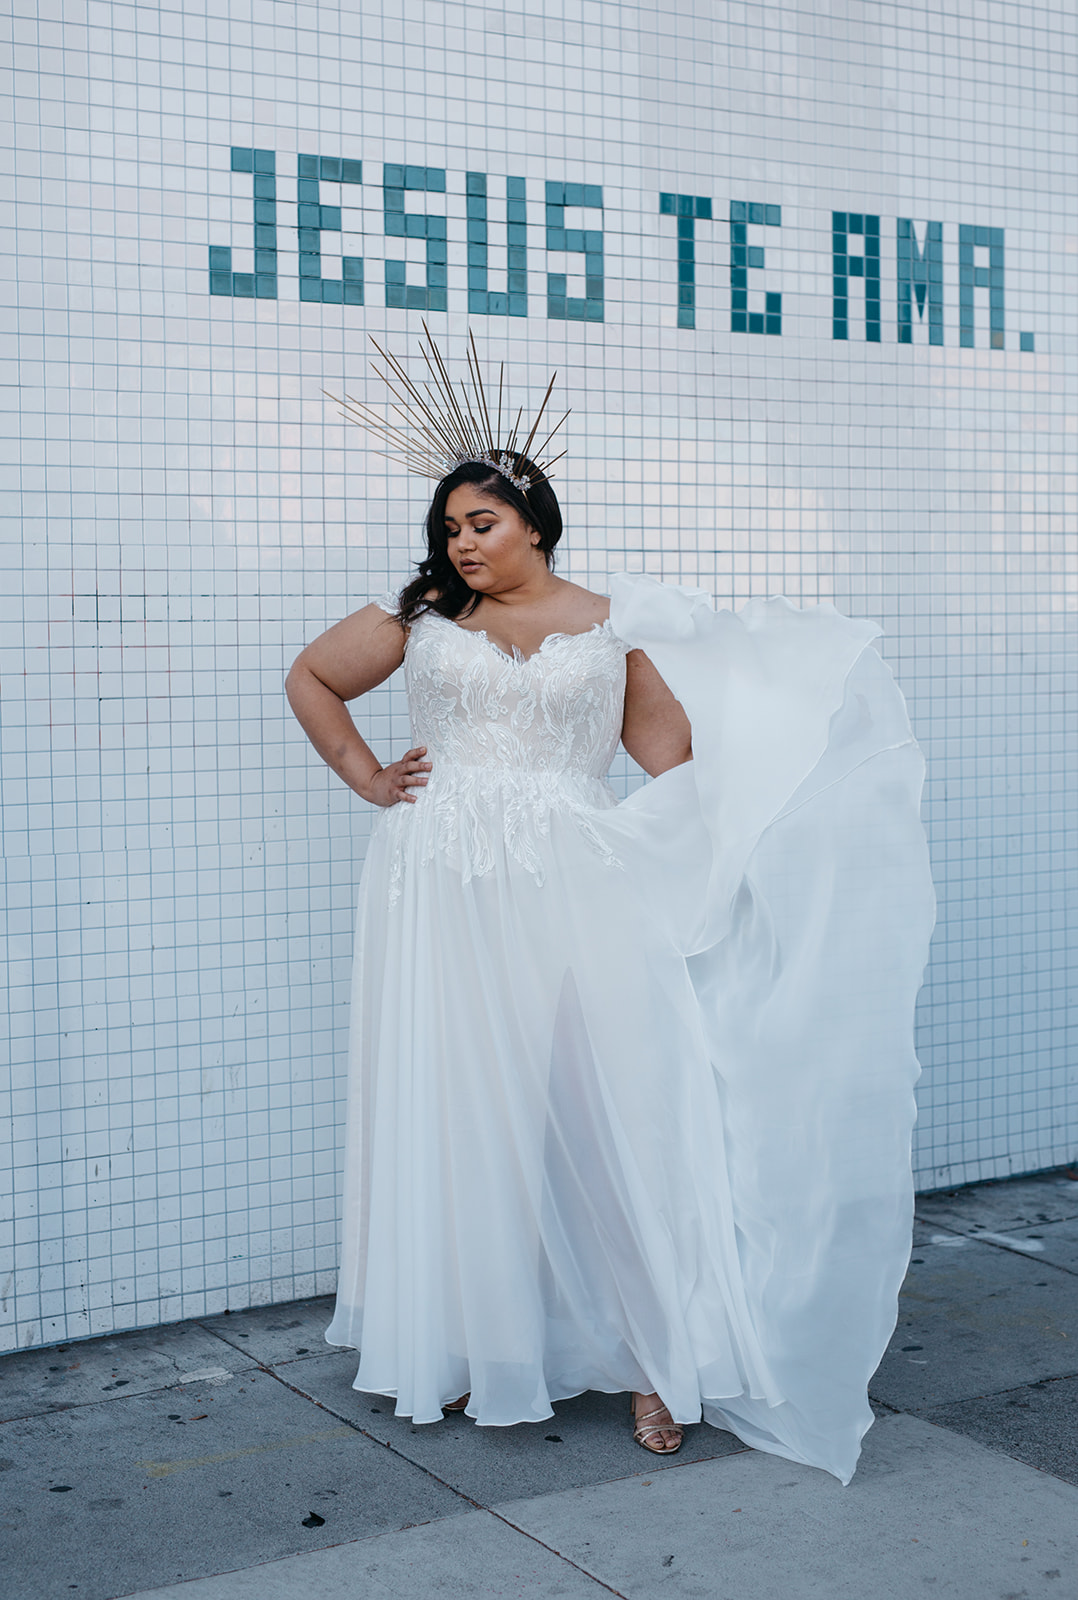 Our Plus Size Wedding Dresses Are Designed for Real Women